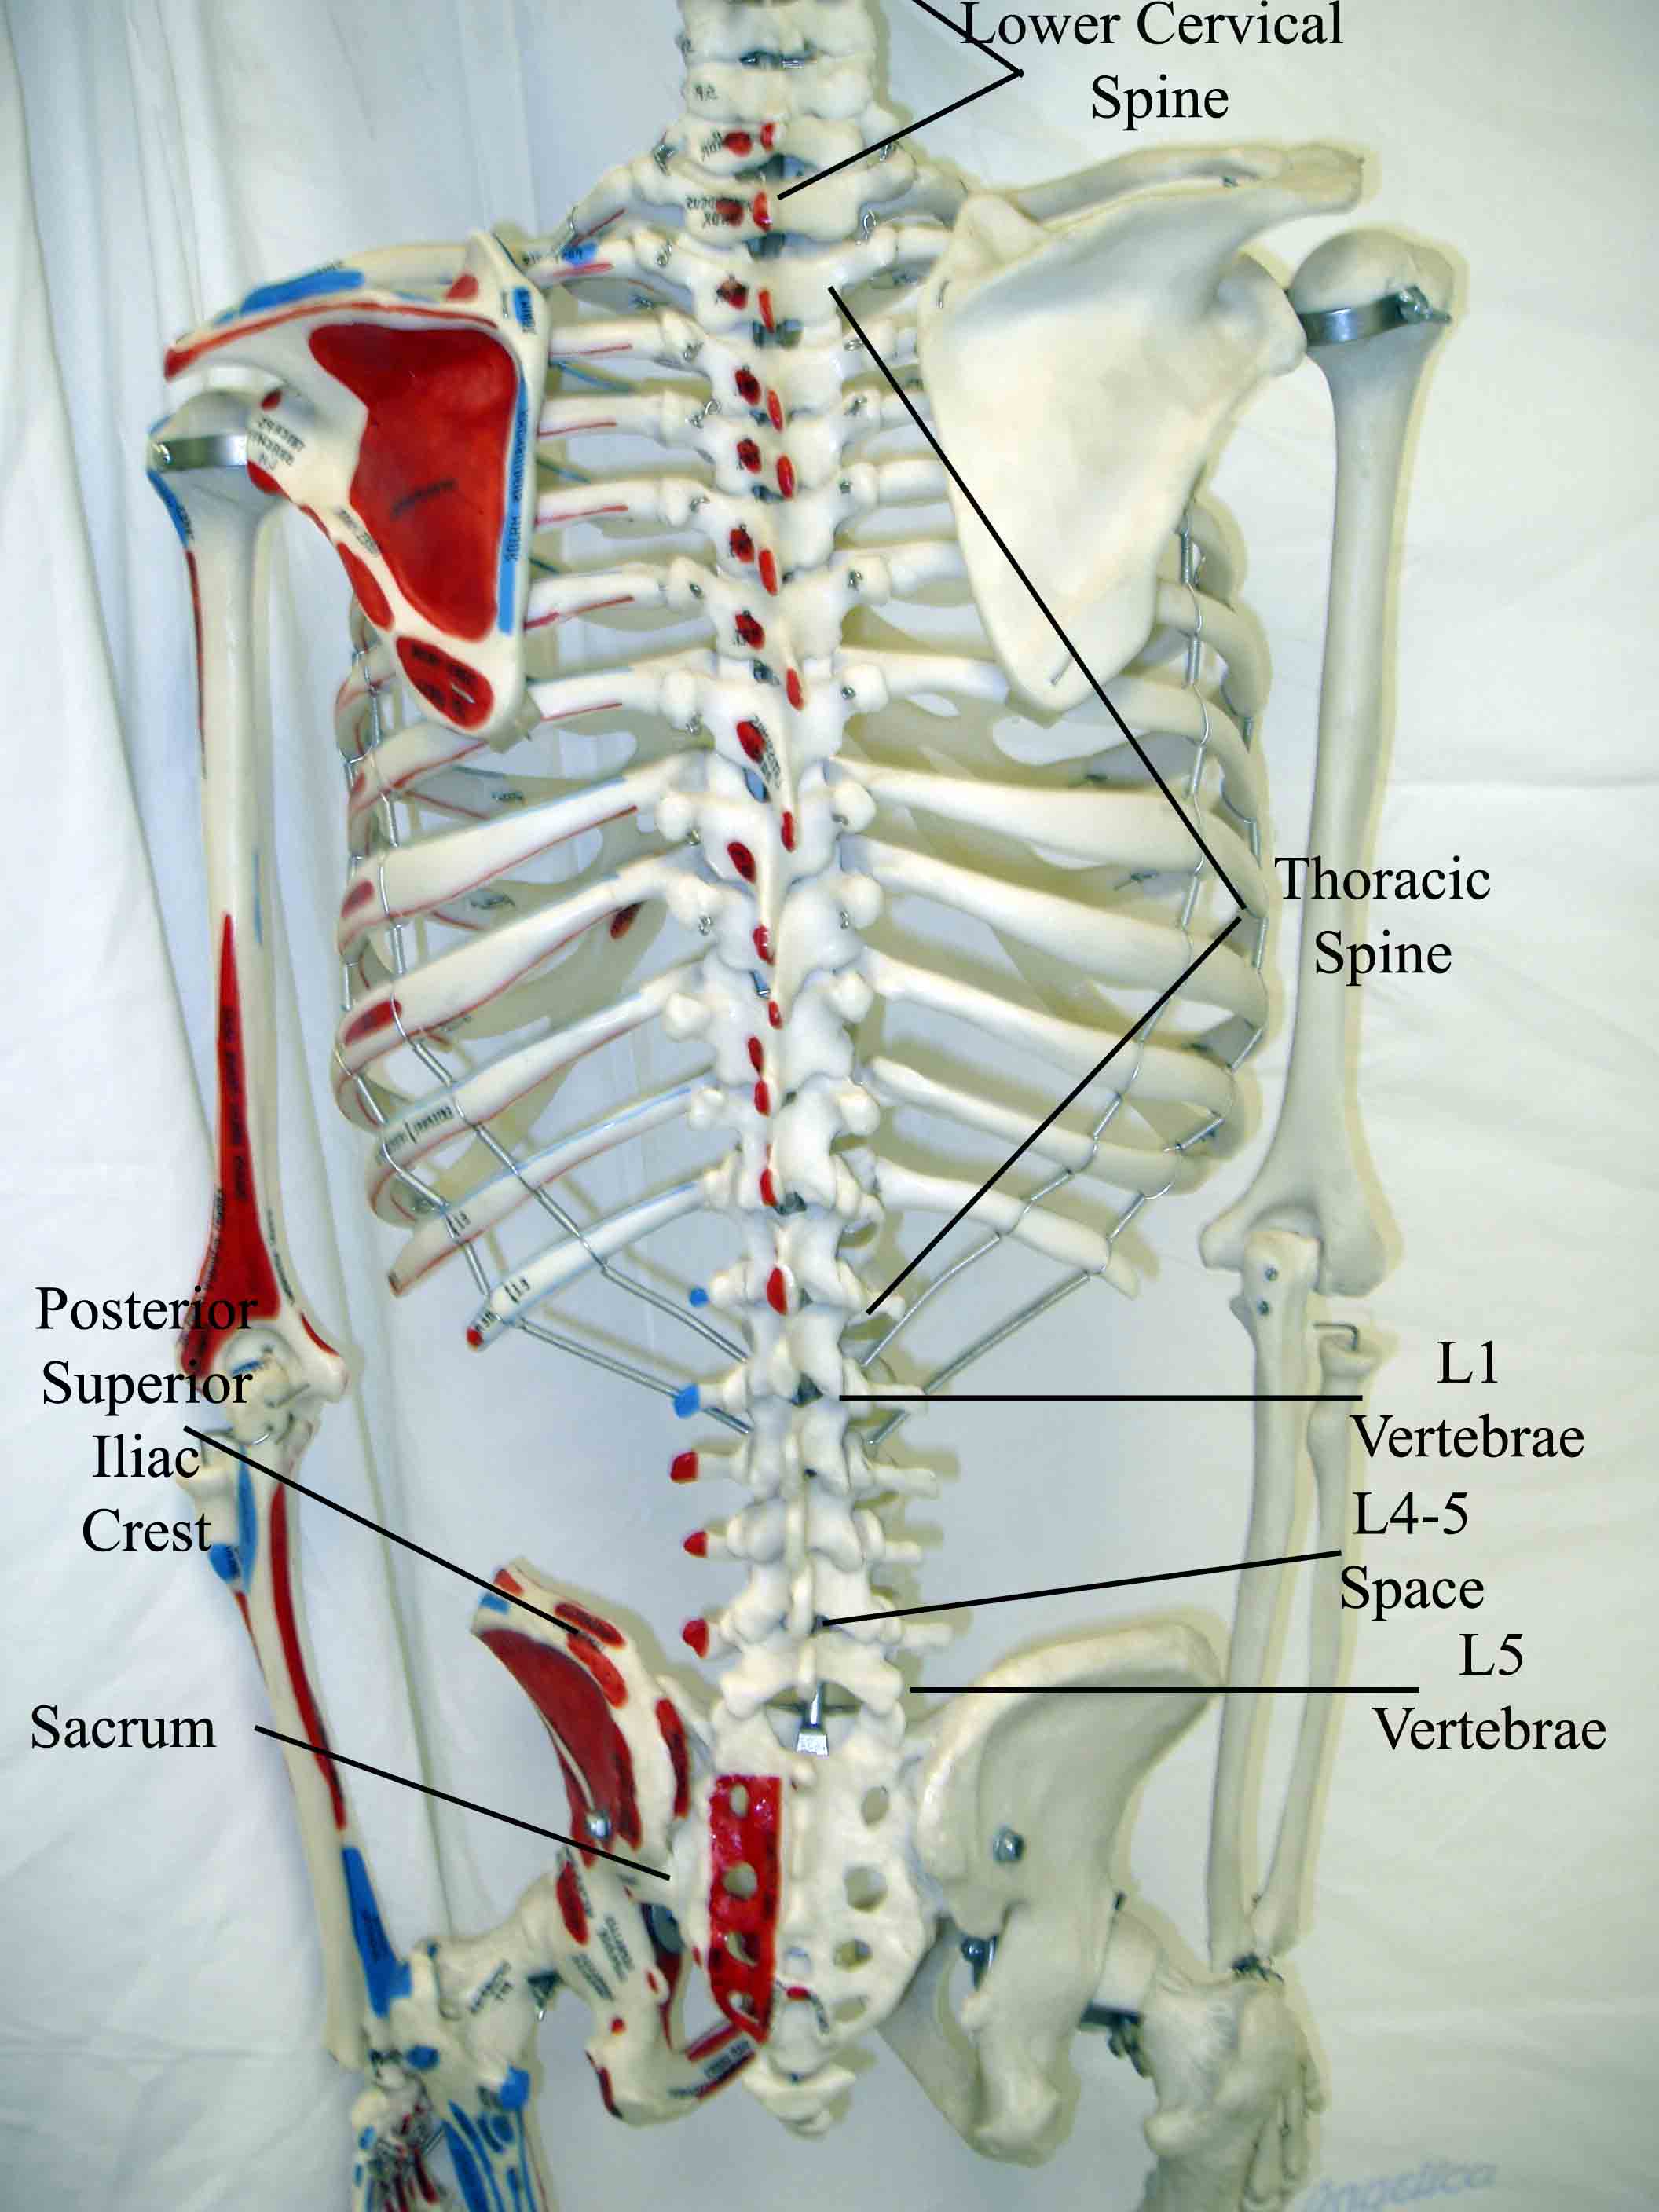 Overview of Spine